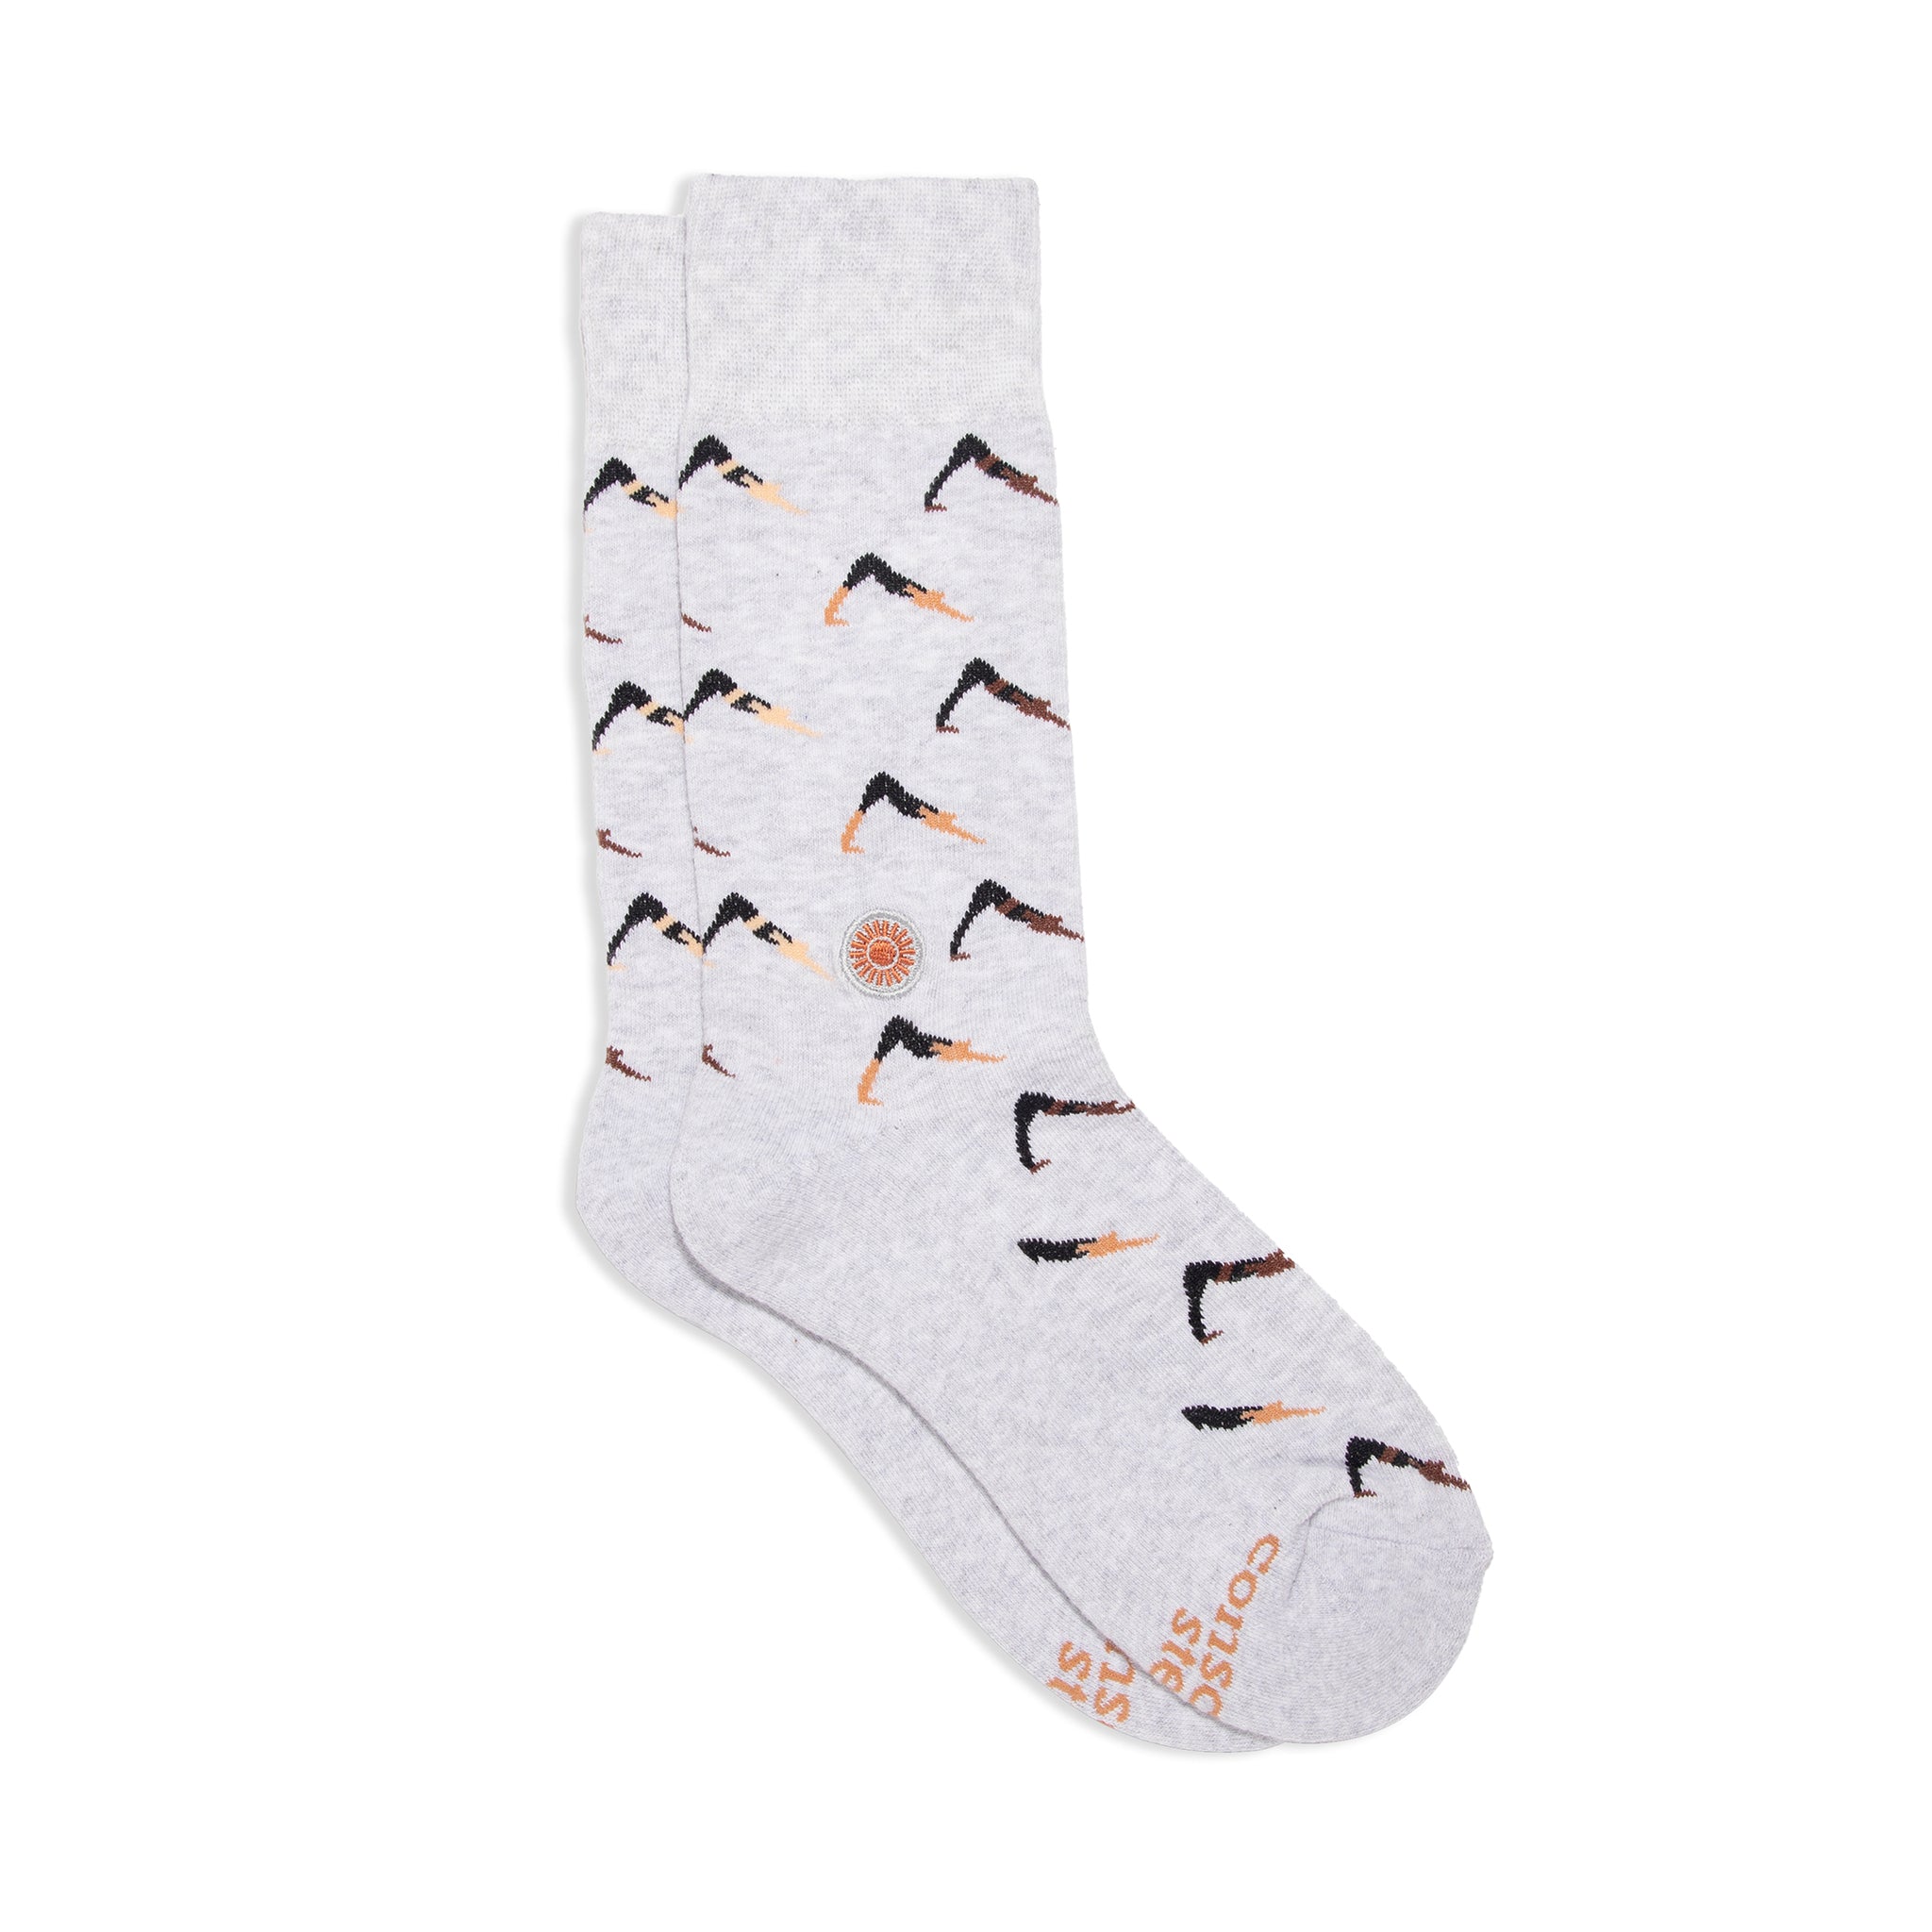 Socks That Build Homes | Sustainable Fashion with a Purpose – Conscious ...